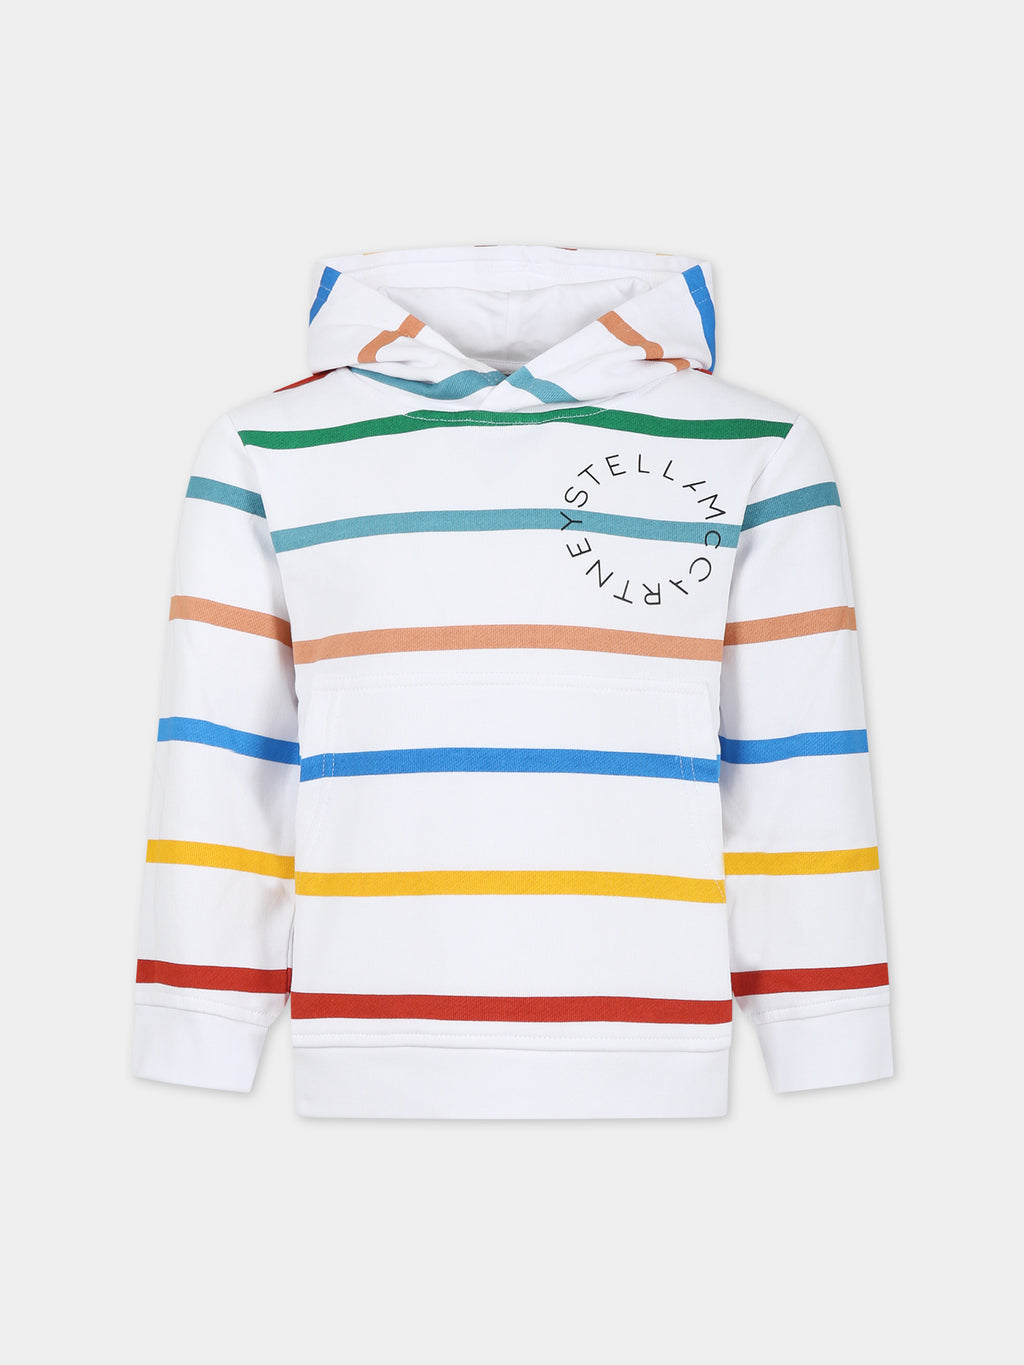 White sweatshirt for kids with multicolor stripes